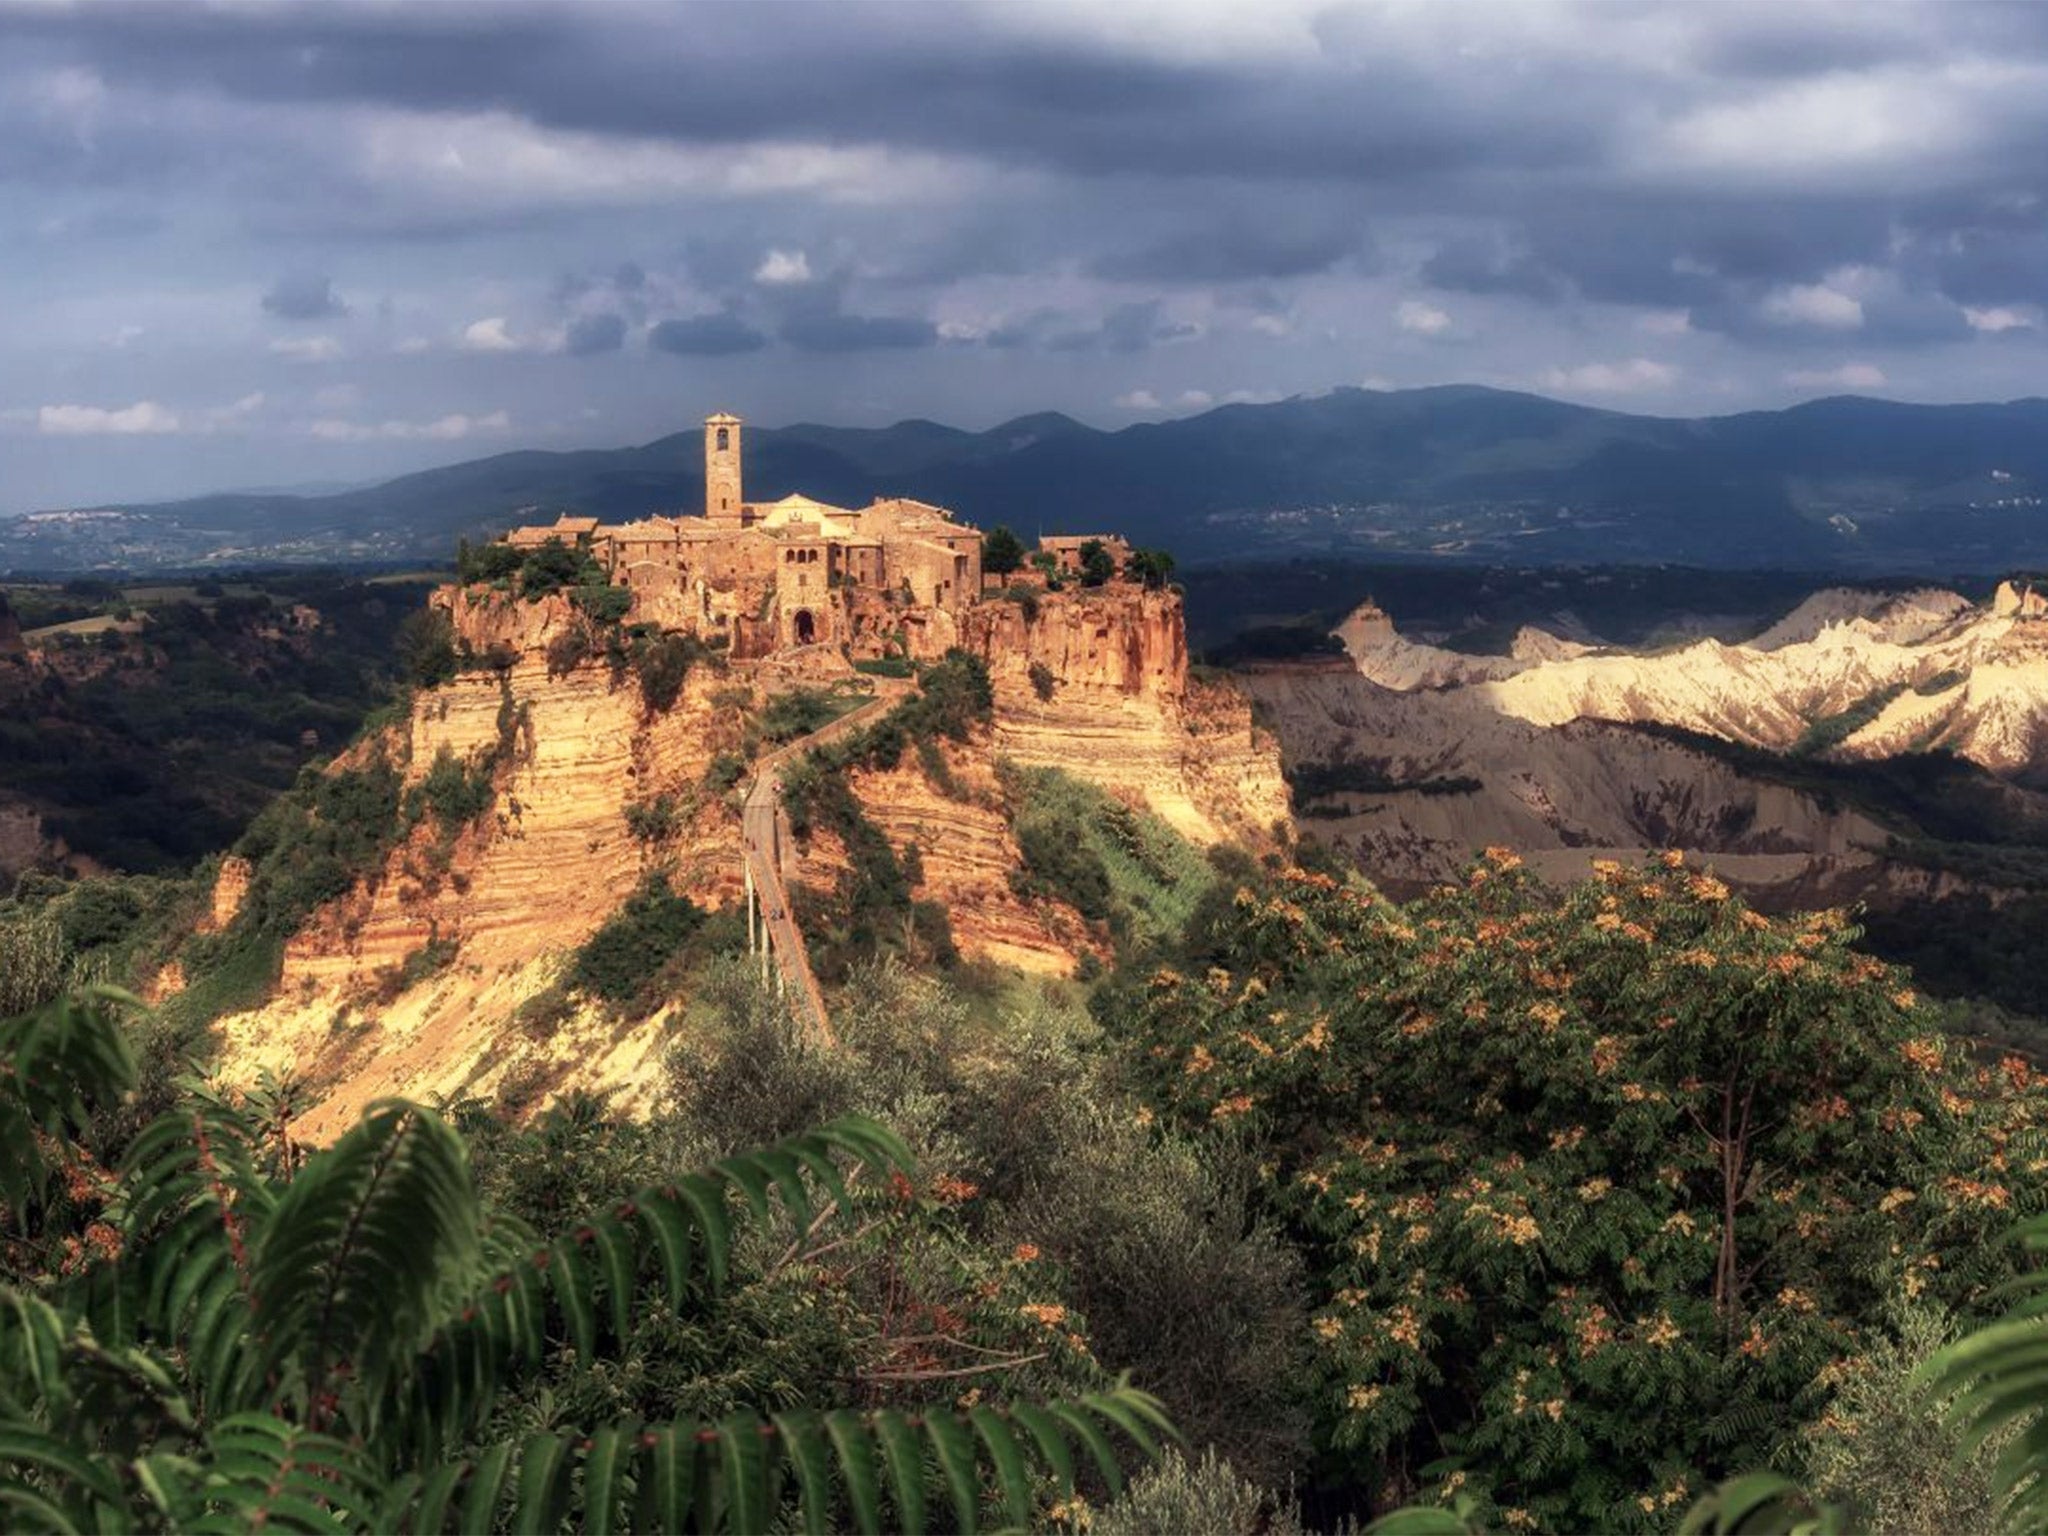 The ancient village of Civita di Bagnoregio now has a winter population of fewer than 10